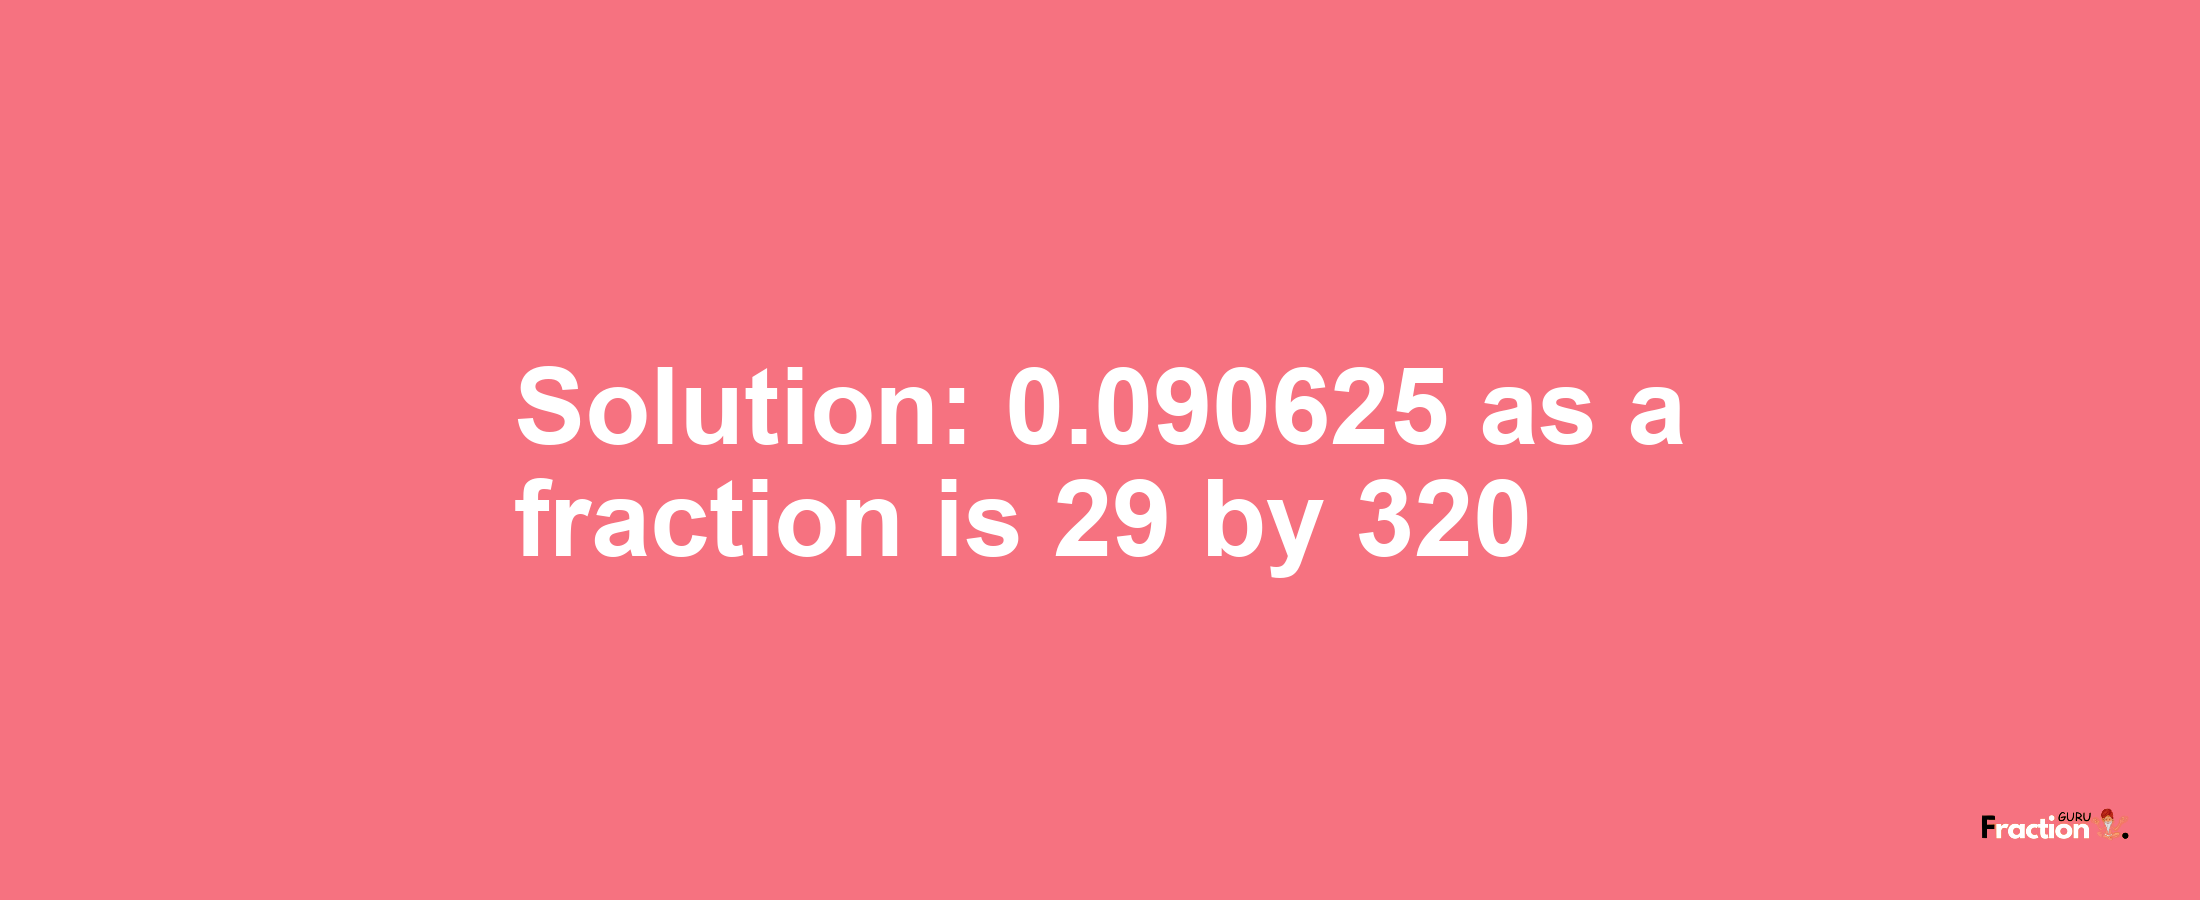 Solution:0.090625 as a fraction is 29/320